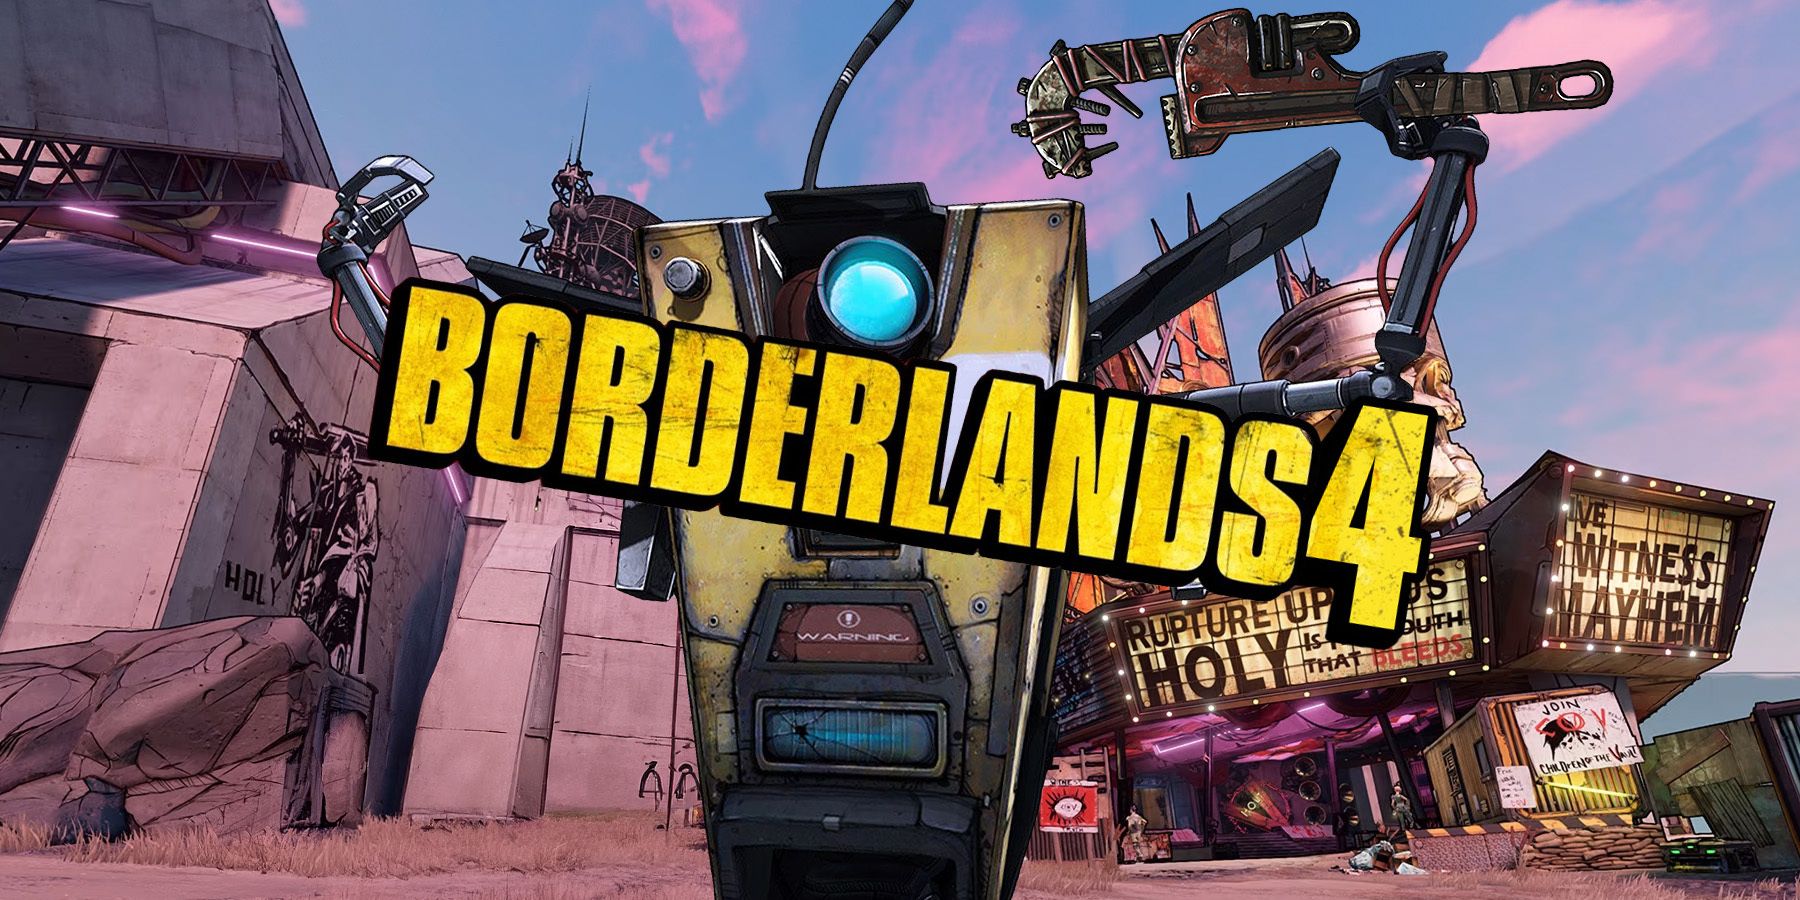 Claptrap wielding a wrench with a Borderlands 4 logo